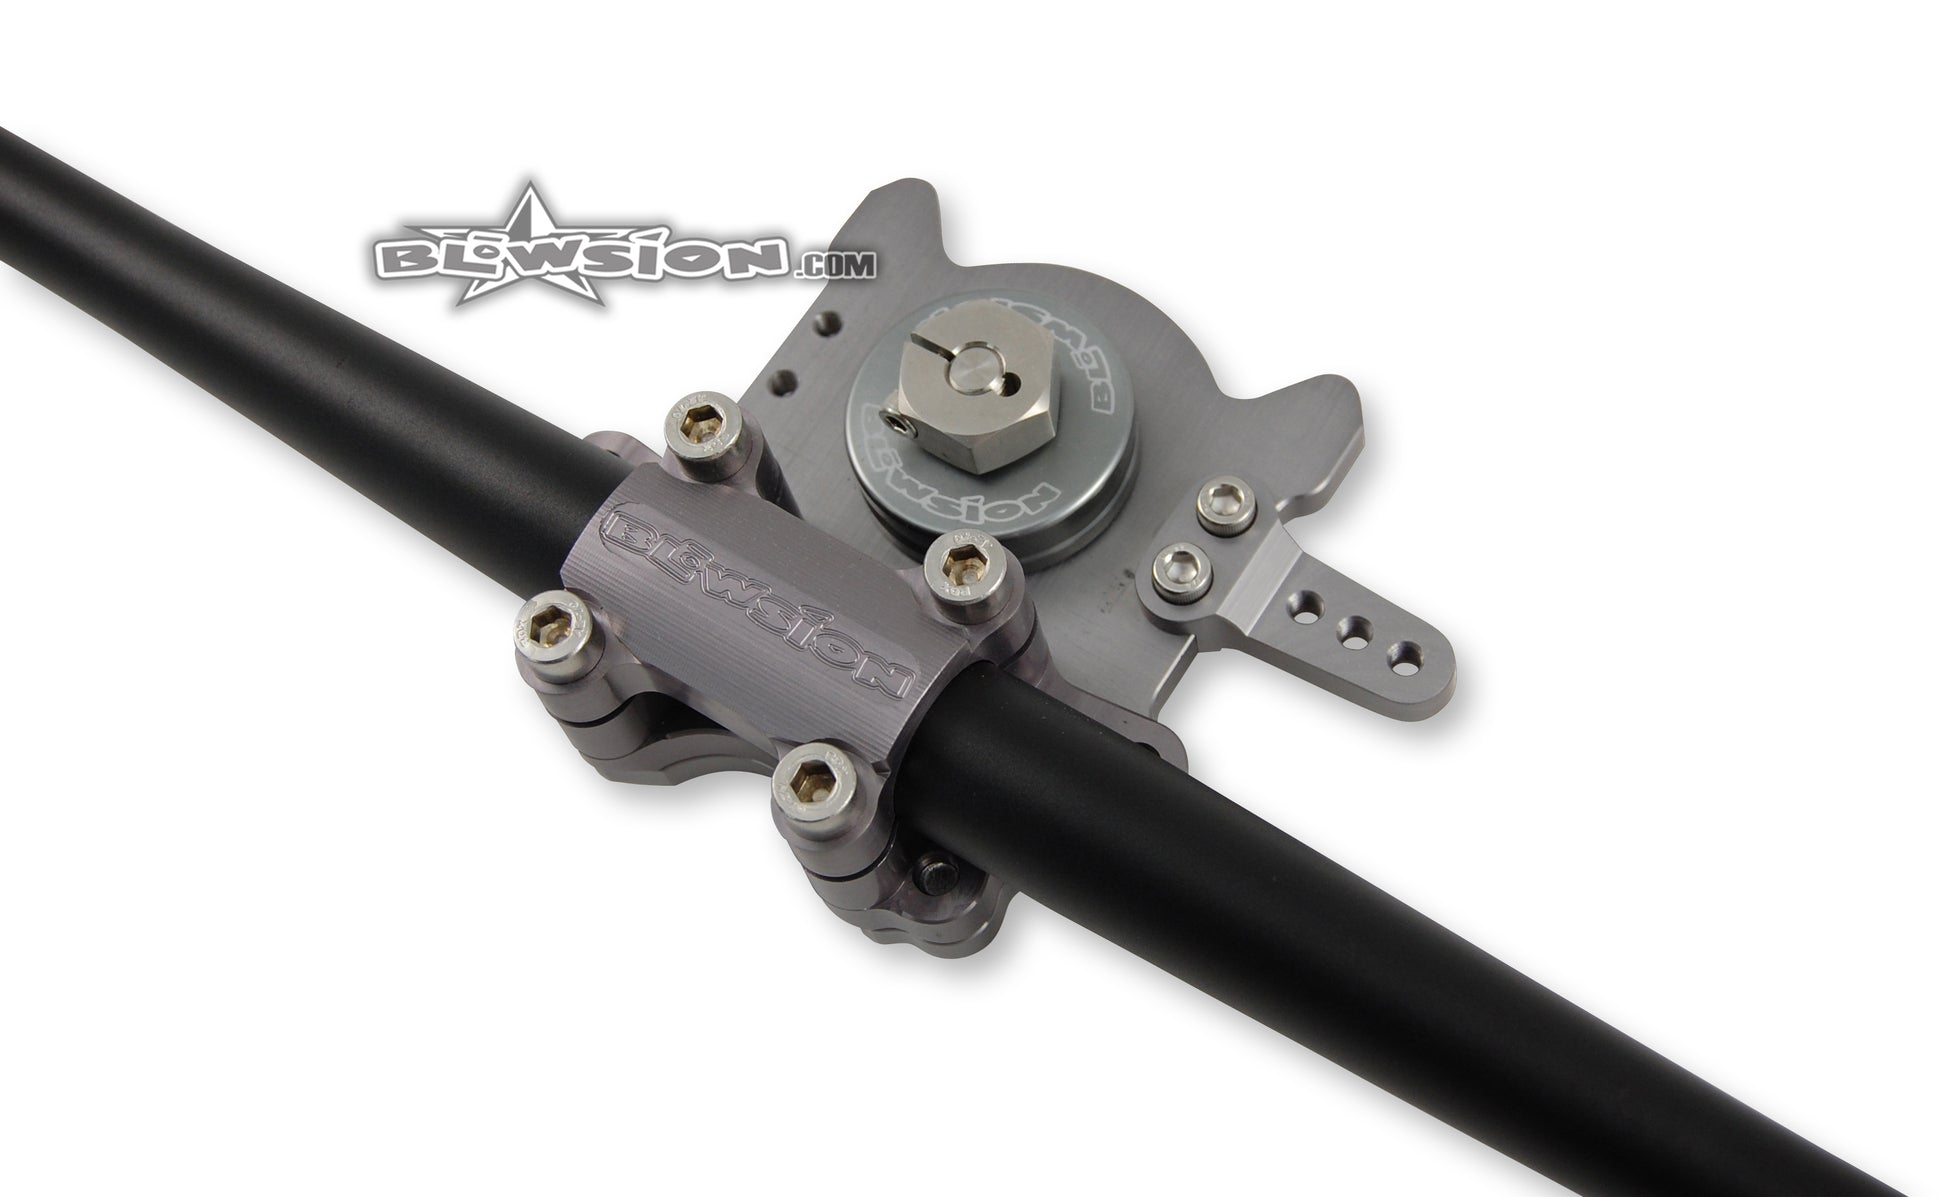 Blowsion Steering System 1-1/8" Fat - Anodized Gun-Metal (fat straight bars sold separately)